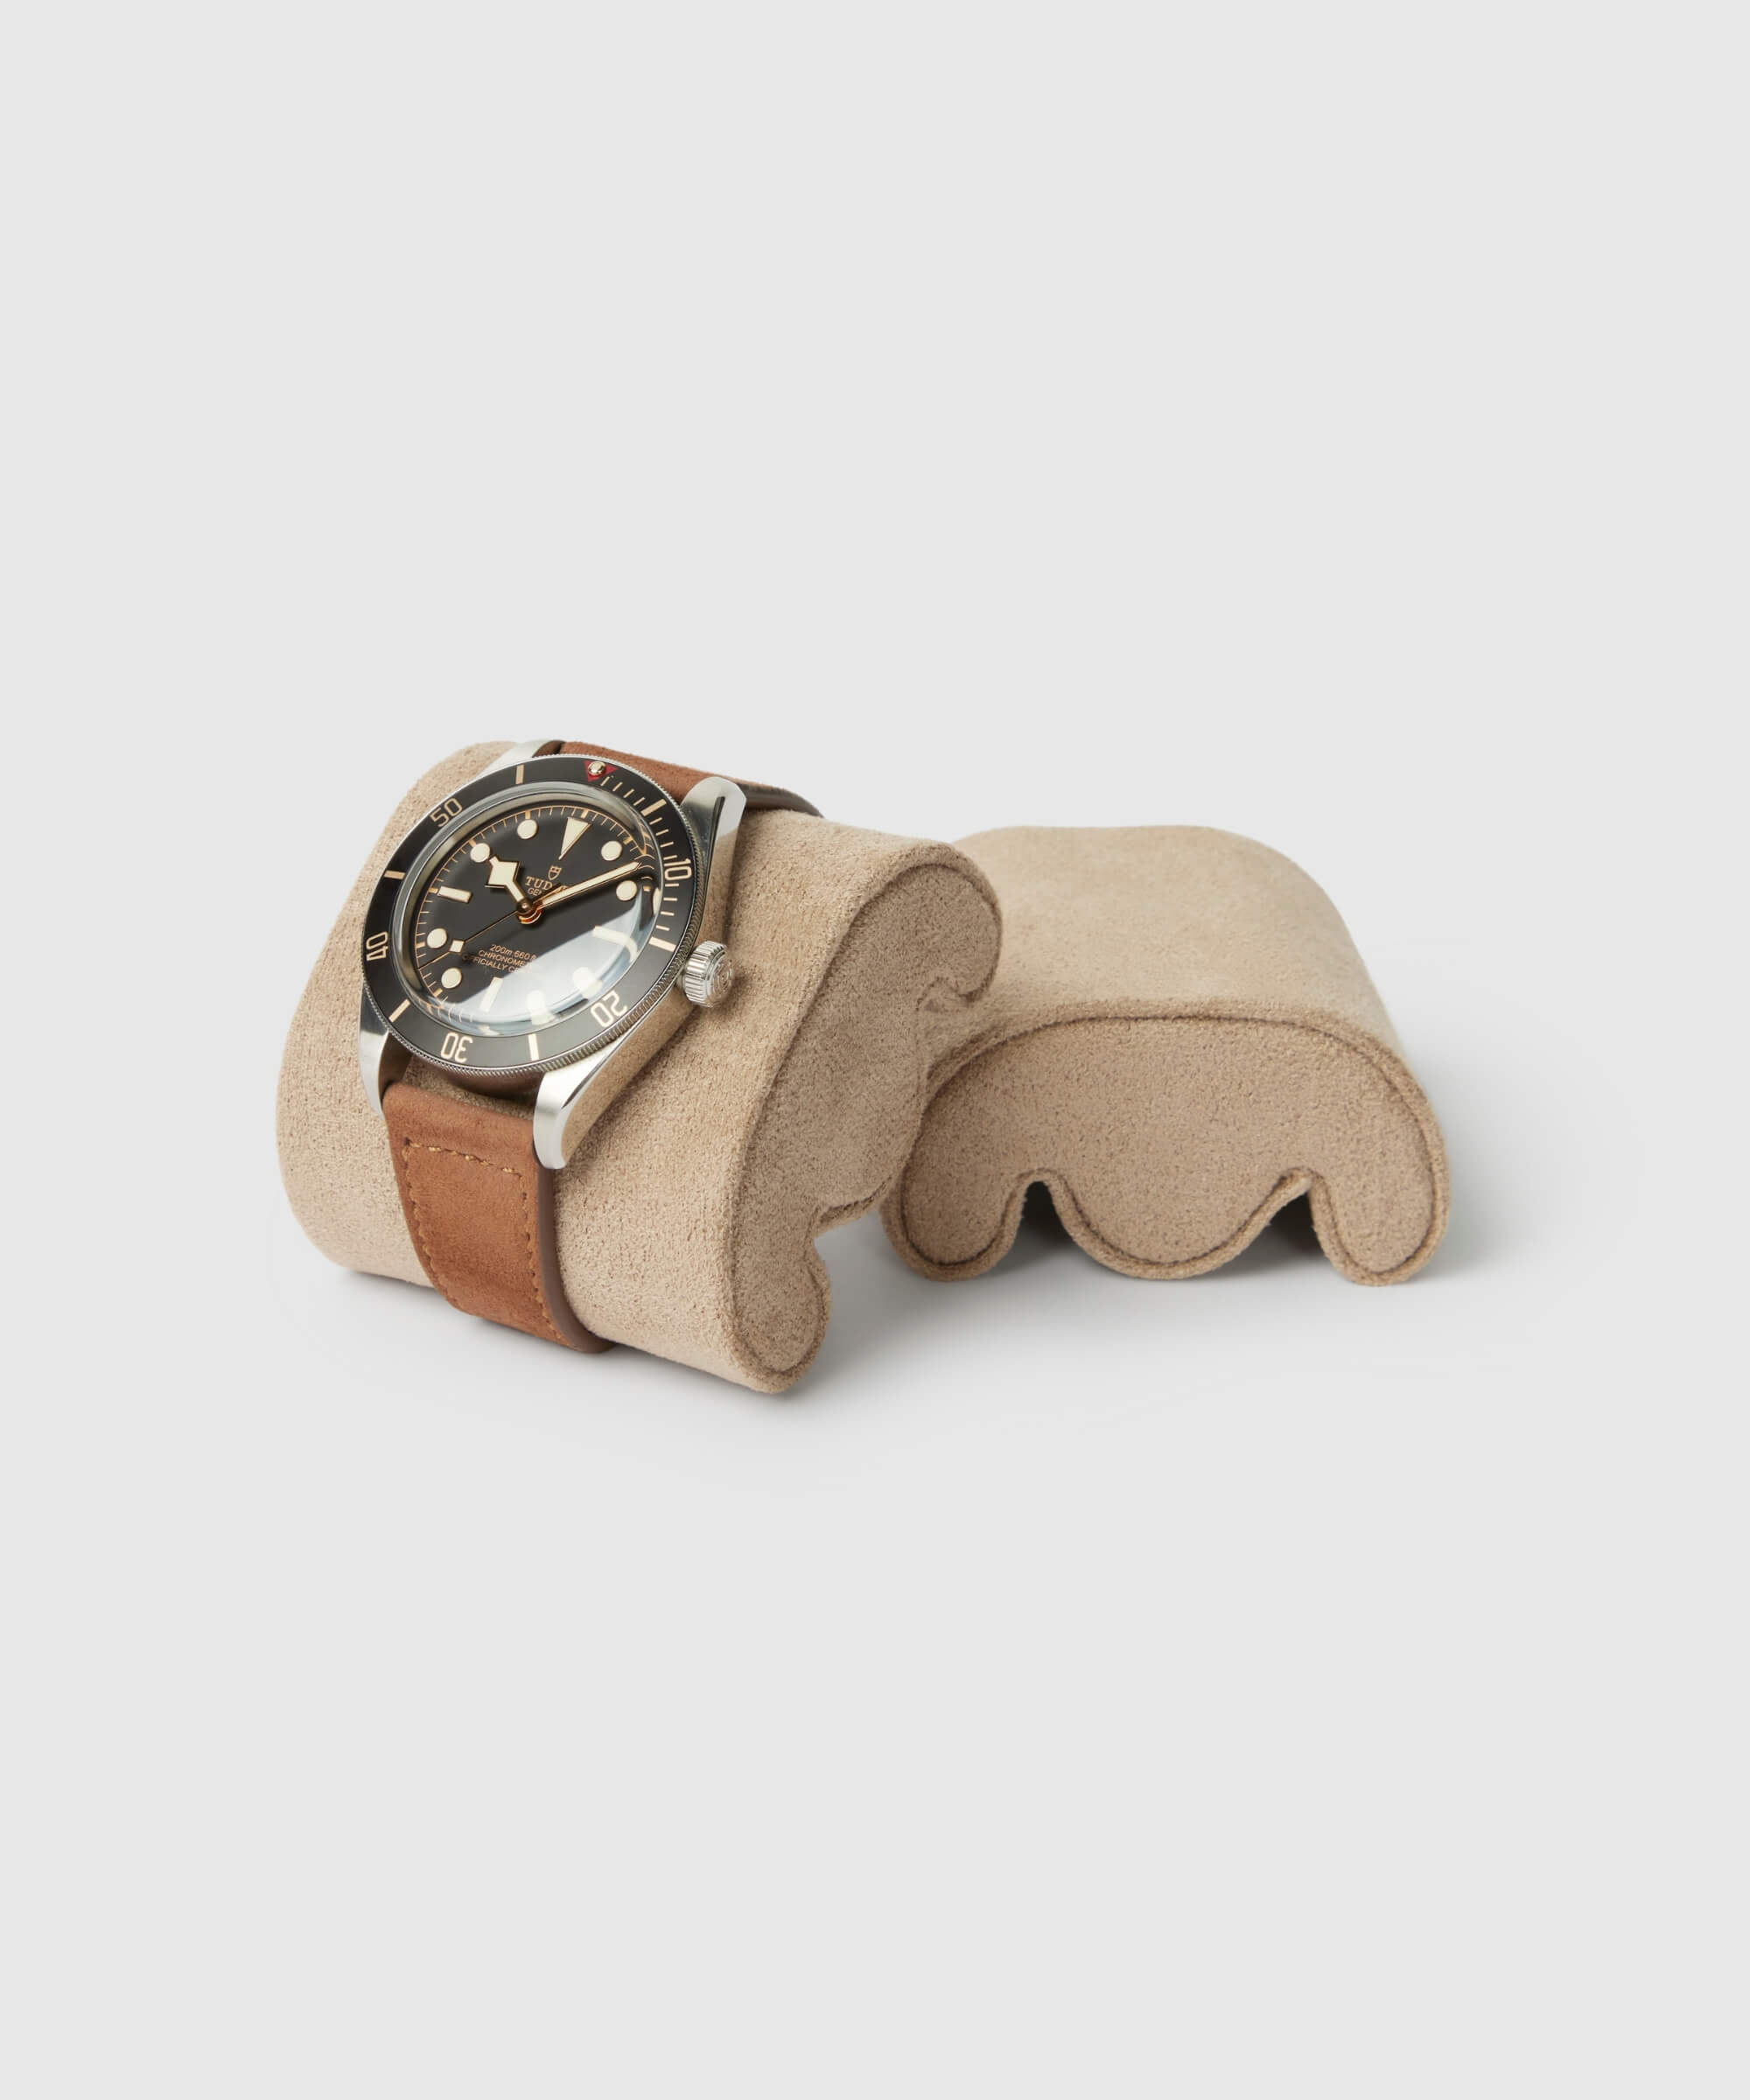 A wristwatch with a brown leather strap and black dial displayed on a beige cushioned Fraser Replacement Watch Case Pillows - X-Small - Taupe/Cream by TAWBURY.